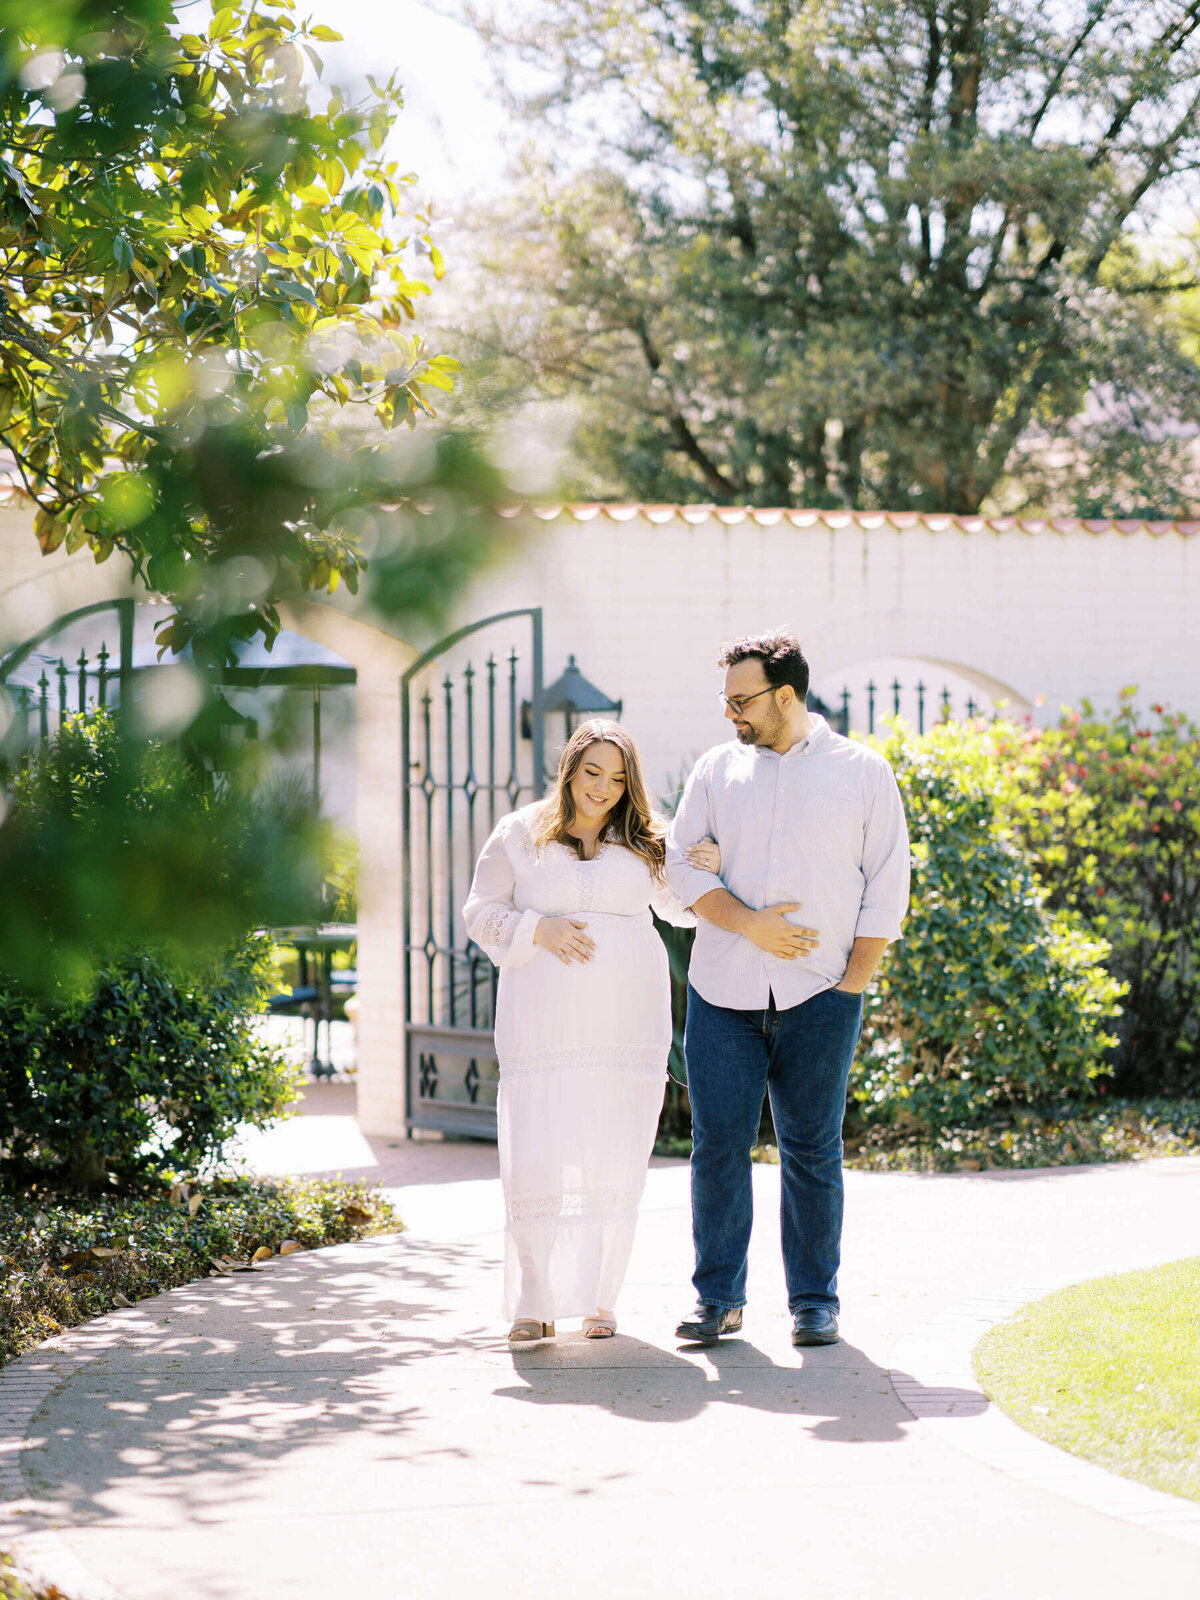 13 Dallas Arboretum Maternity Family Session Kate Panza Photography Kim and Nic